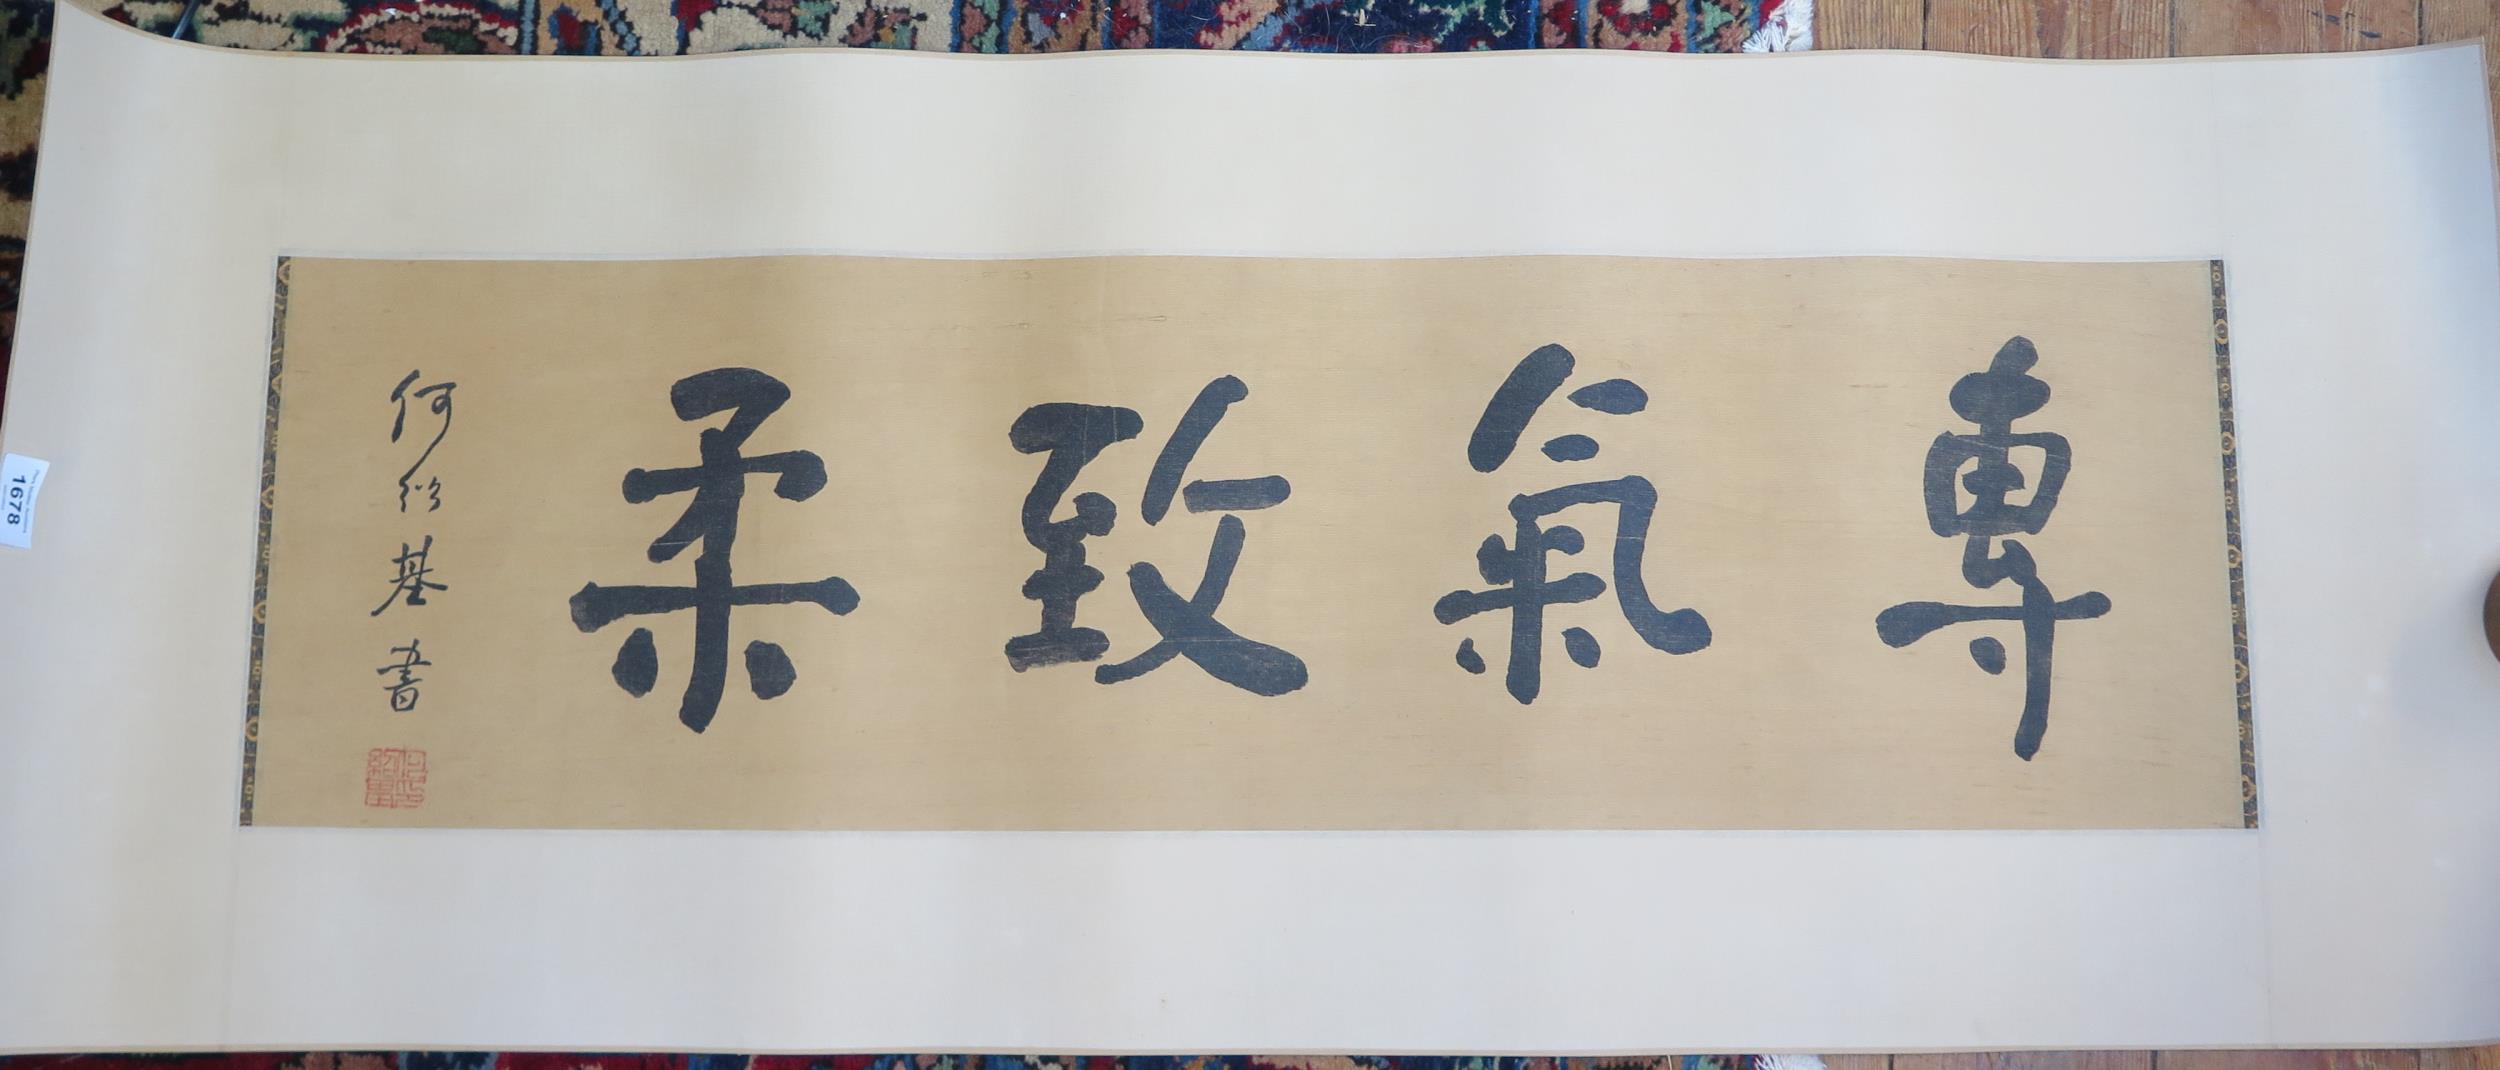 A Traditional Chinese Calligraphy Scroll Painting, ink on silk, attributed to He Shaoji, 113 x 44.